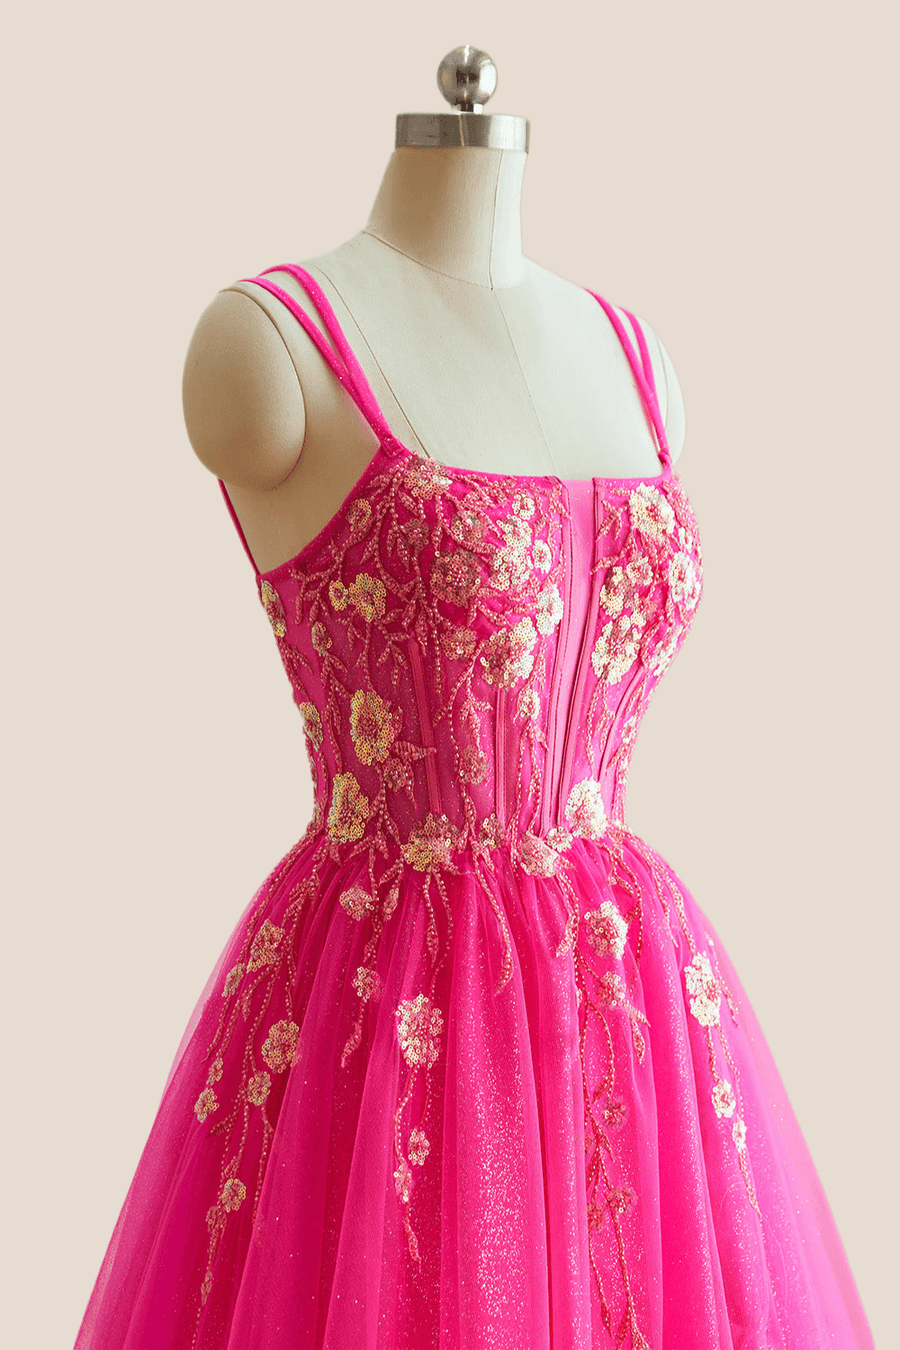 Hot Pink Tulle A-line Long Formal Dress